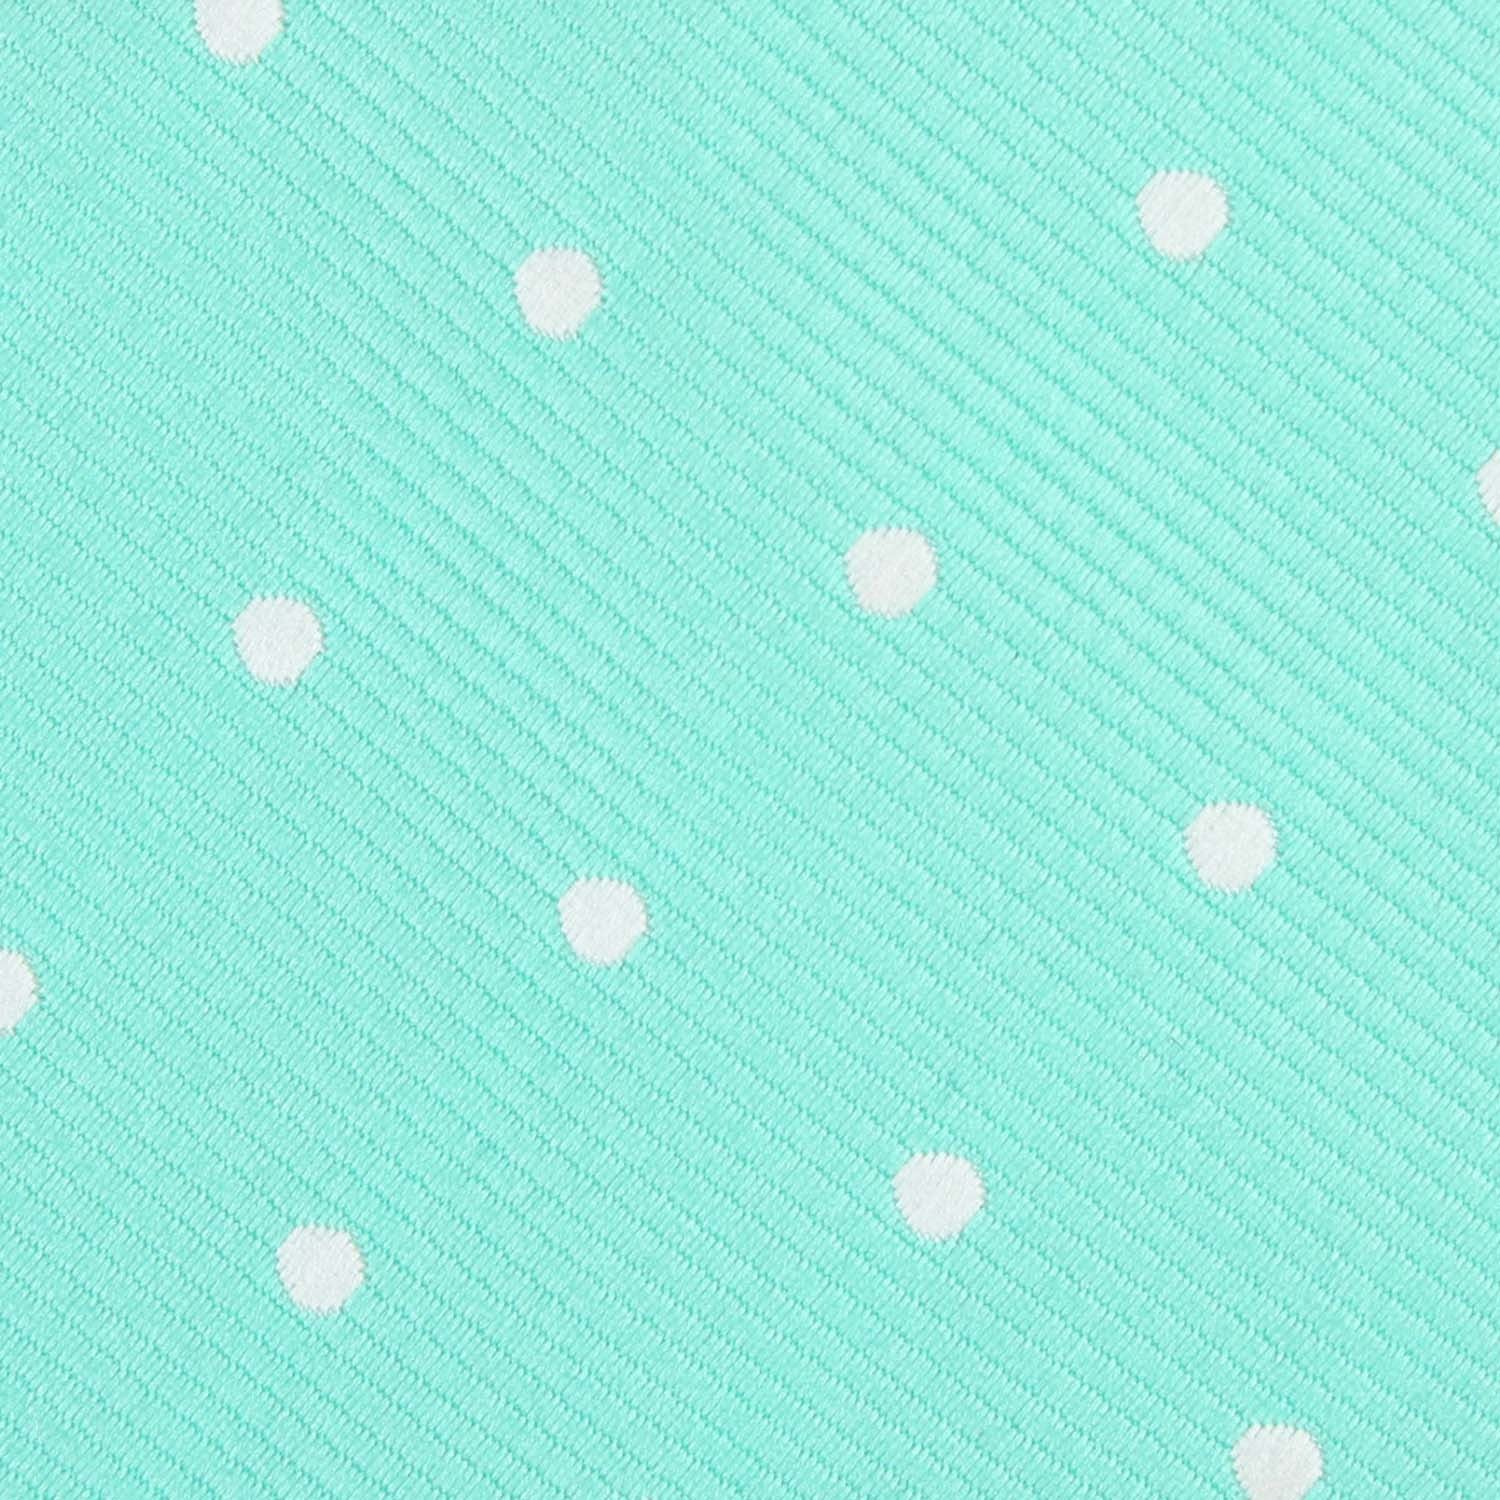 Seafoam Green with White Polka Dots Fabric Pocket Square M138